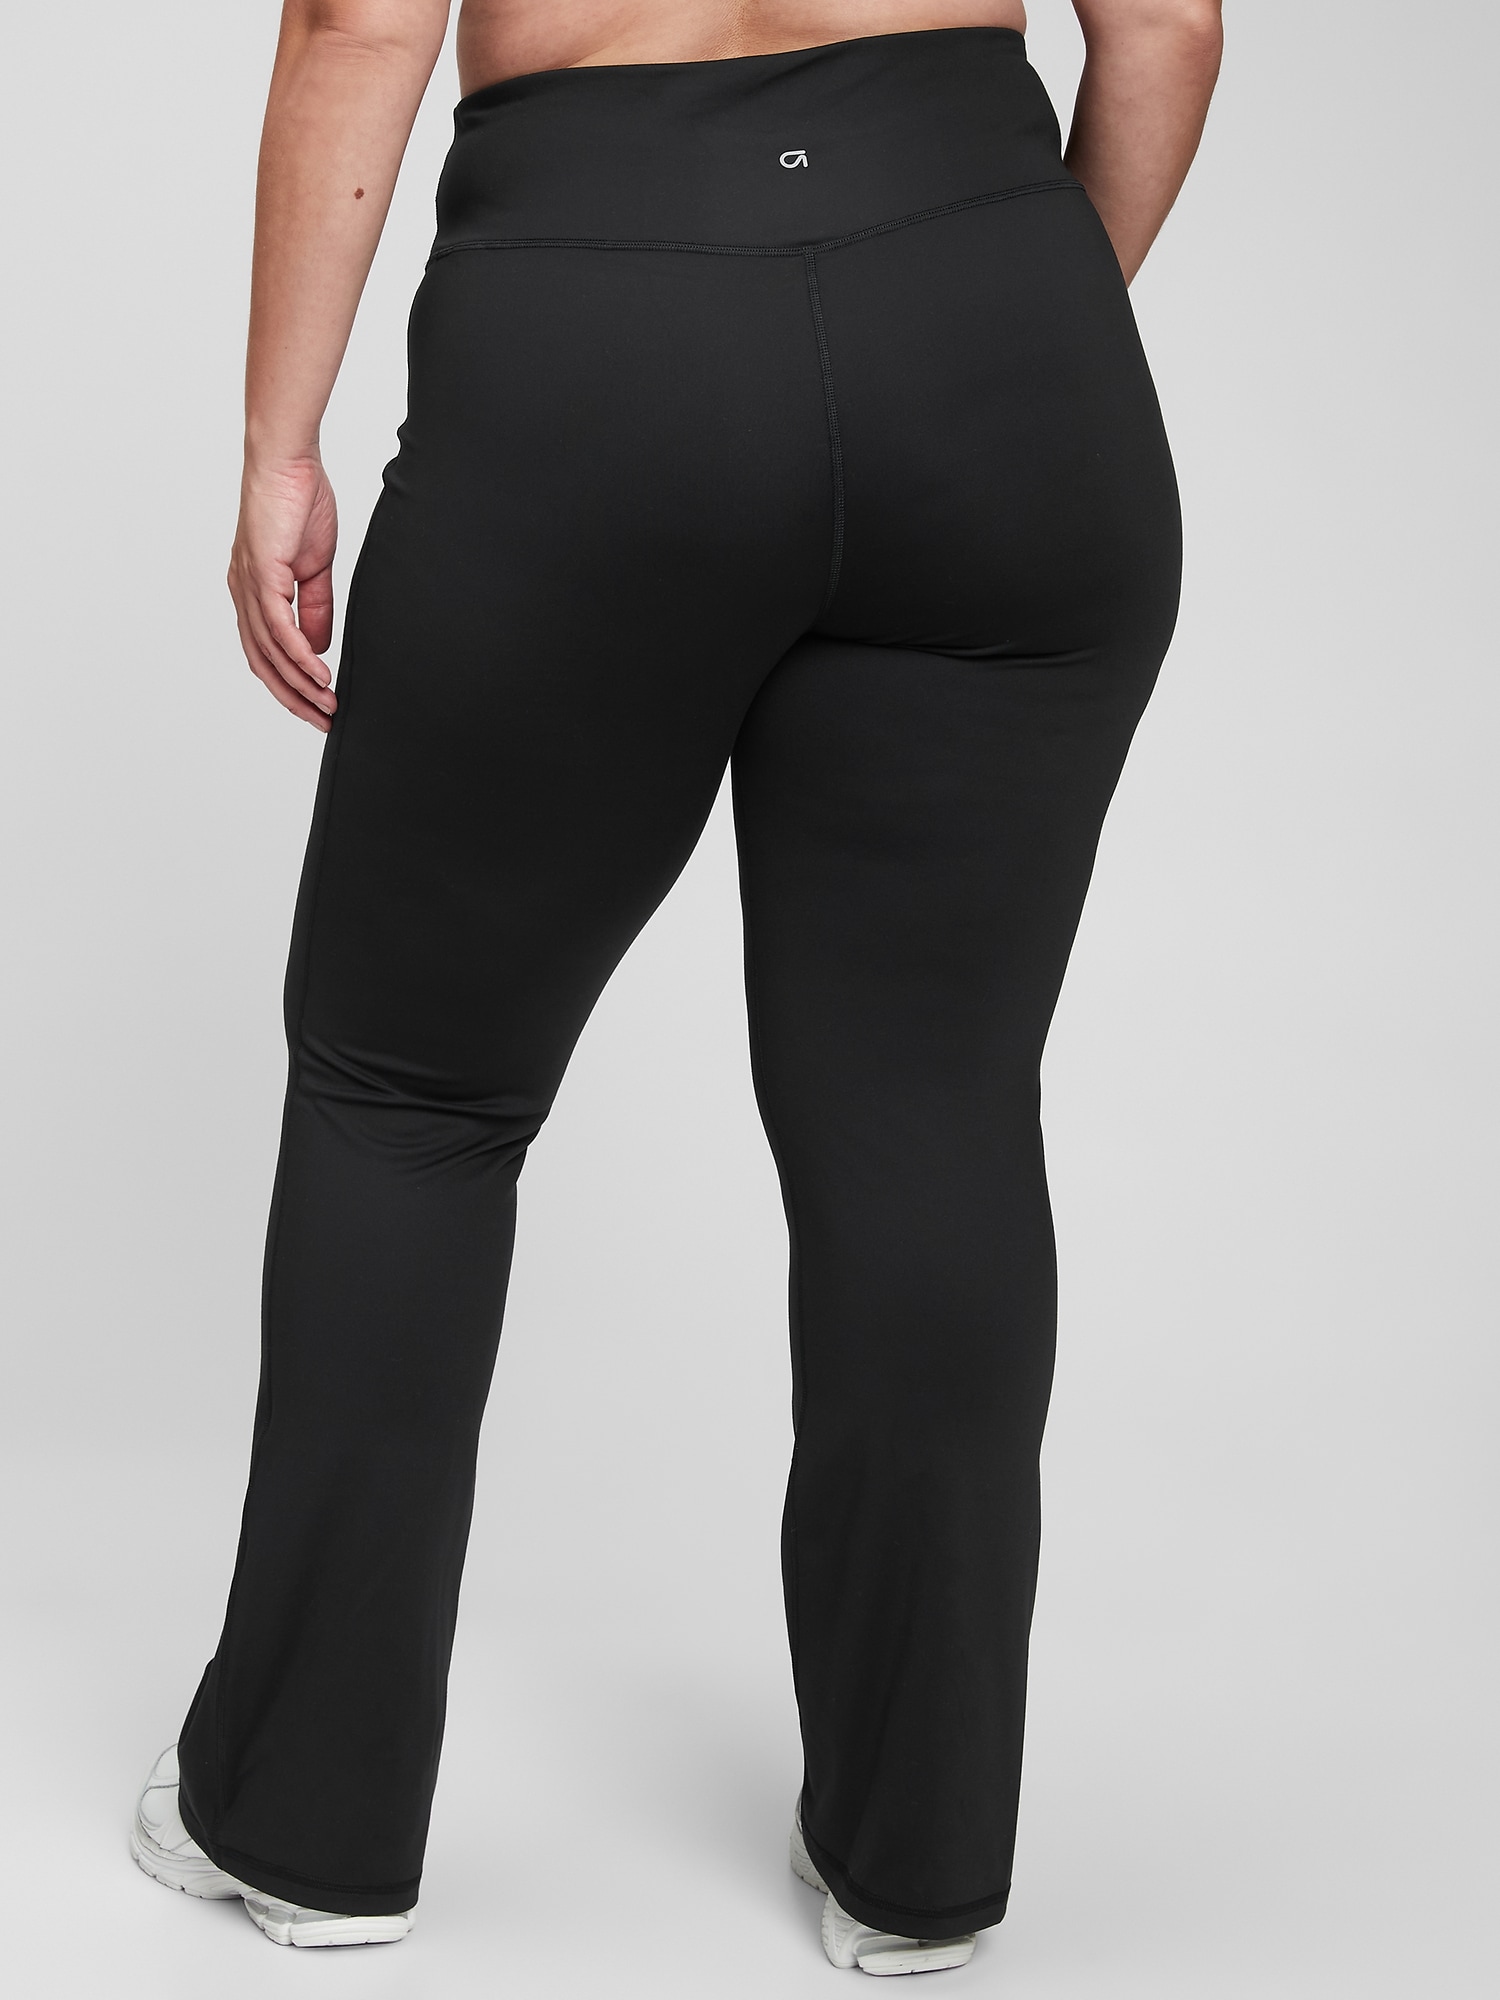 GapFit Low Impact Linear VBack Jacquard Bra and High Rise Linear Jacquard  78 Leggings  The Deals at Gap Are Always Good but Have You Seen the Workout  Clothes  POPSUGAR Fitness